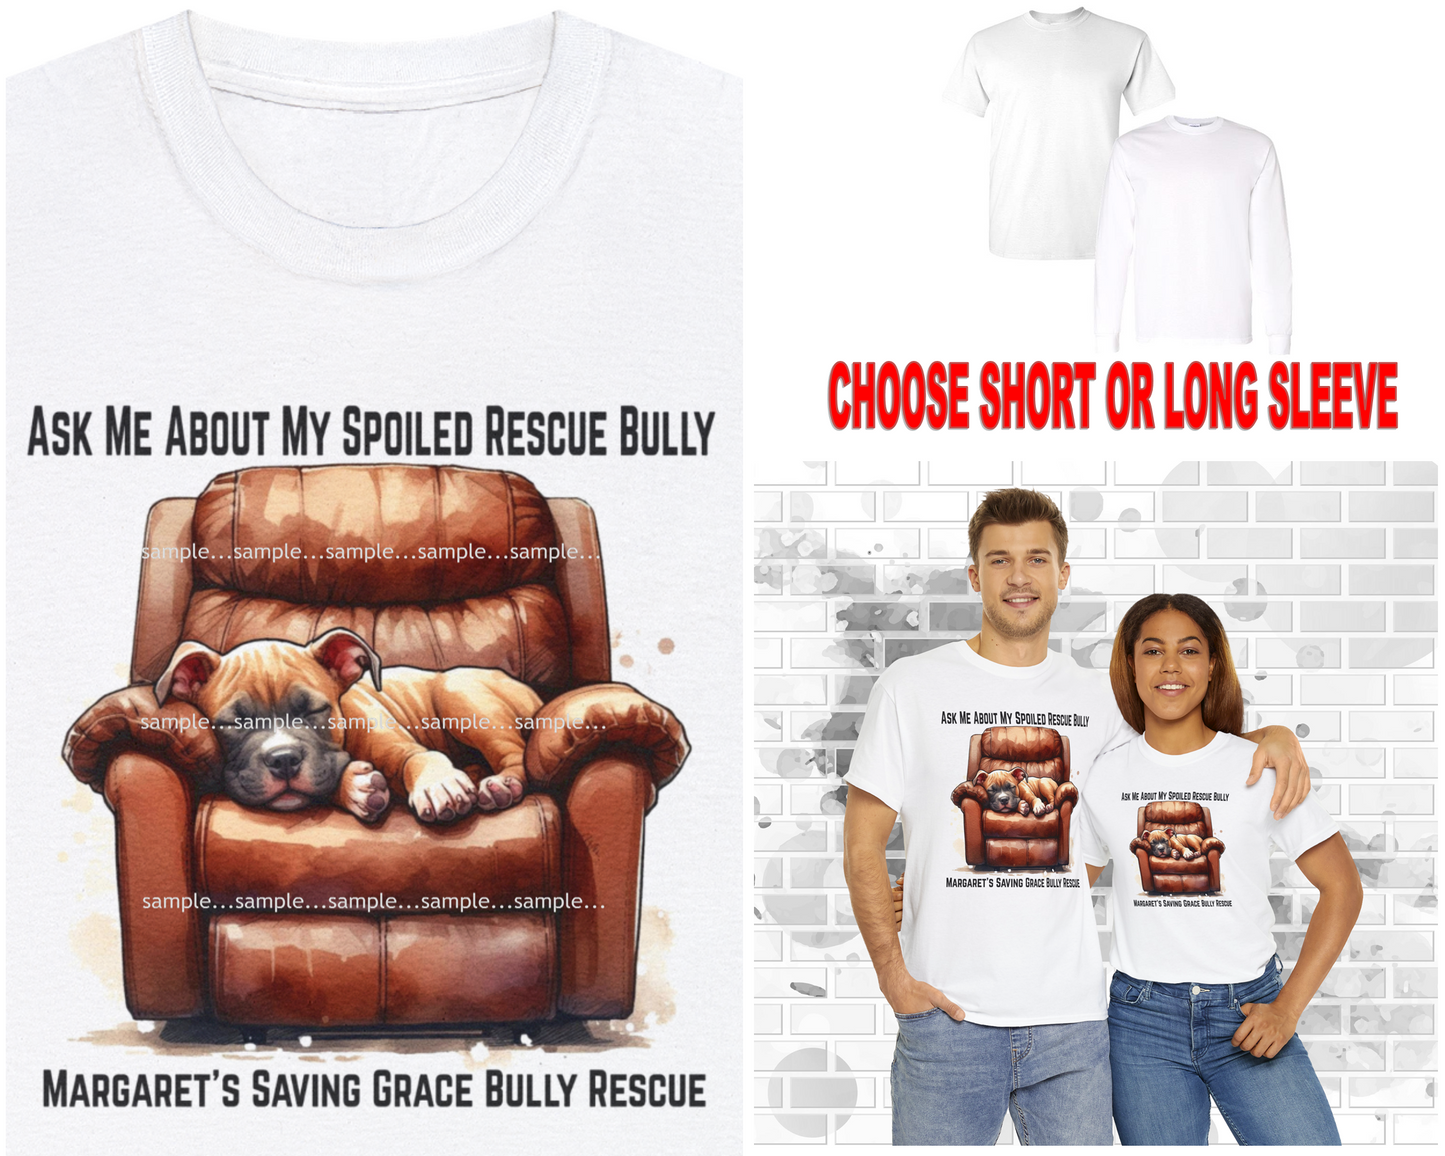 MSGBR Bully Rescue Pitbull Dog Breed Ask Me About Spoiled Rescue Bully On Recliner #2 White T Shirt